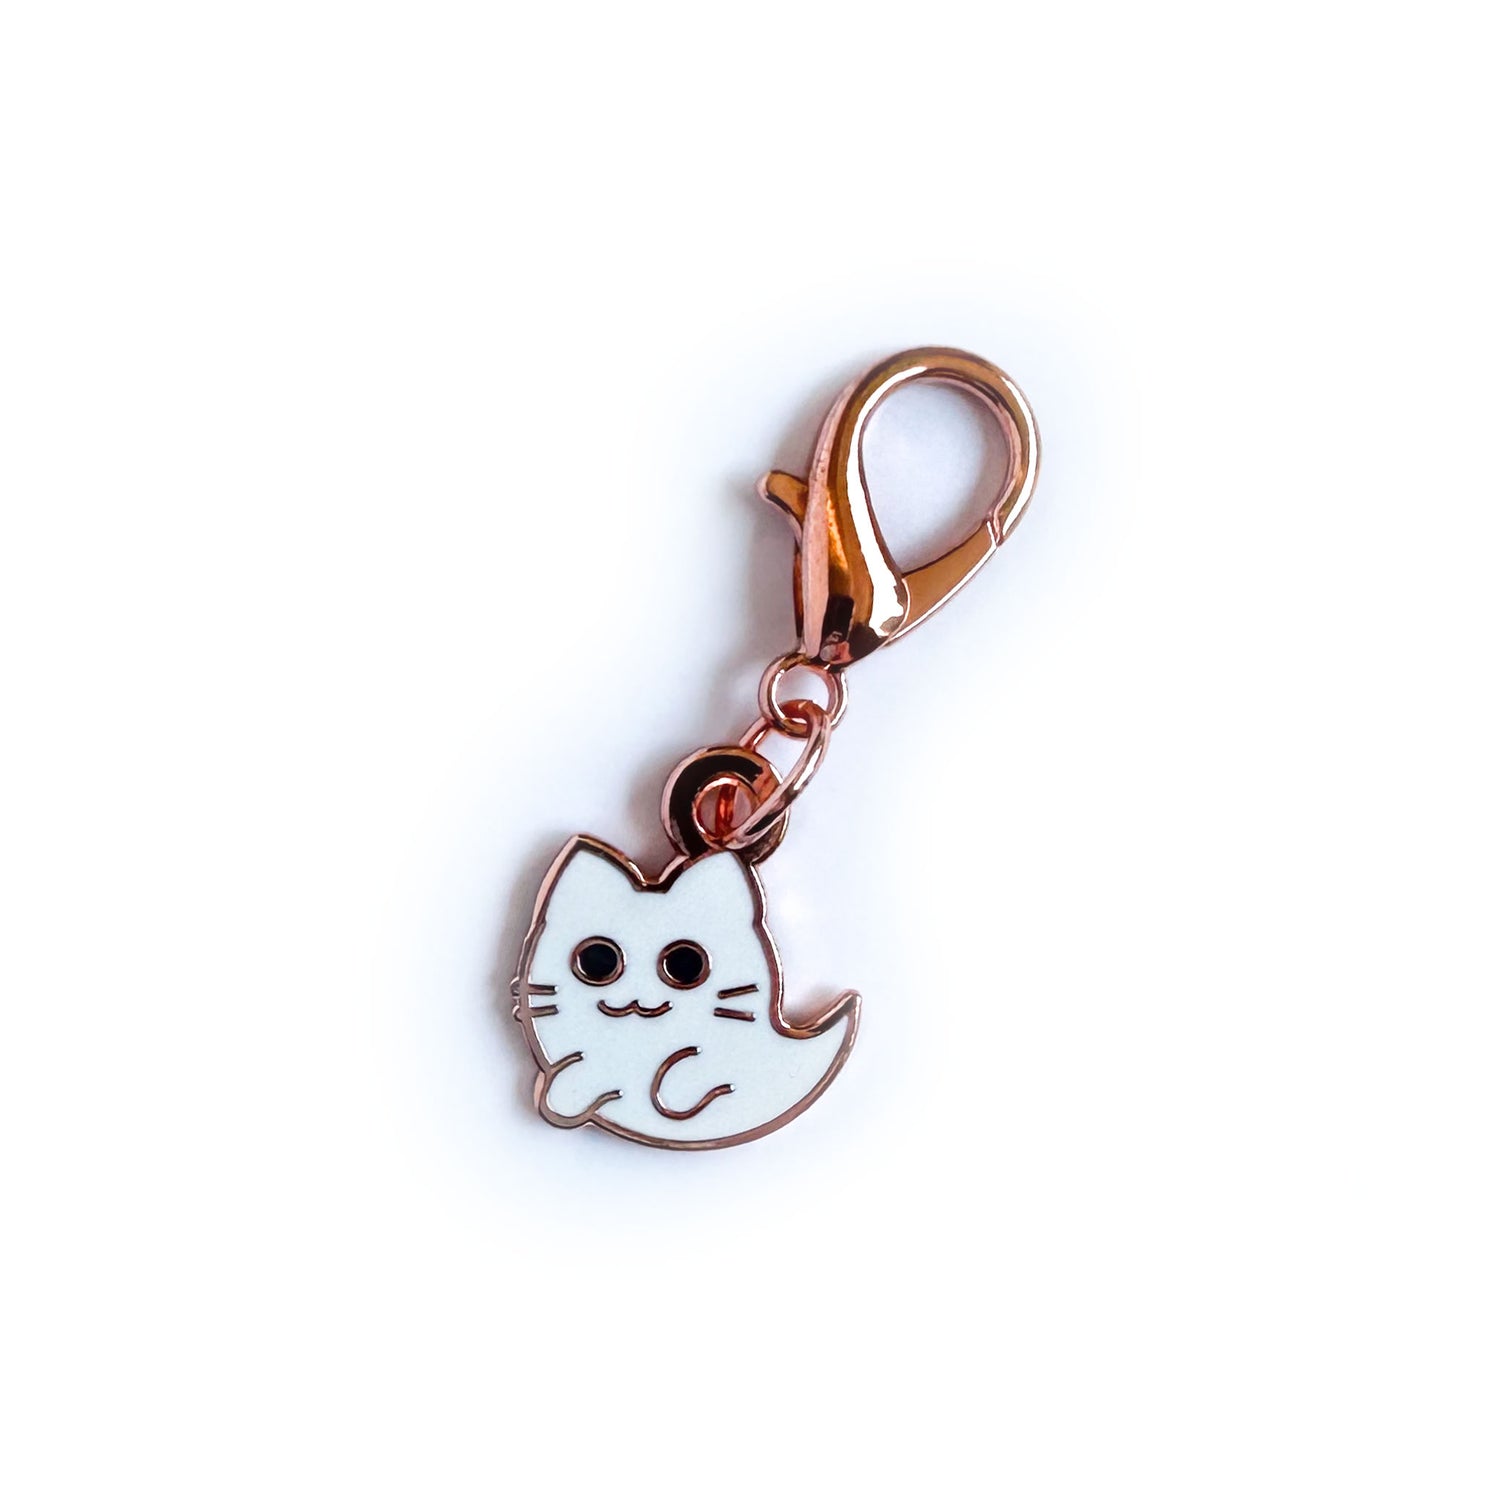 A lobster claw clasp charm of a ghost cat. The charm has copper colored metal and hard enamel details.